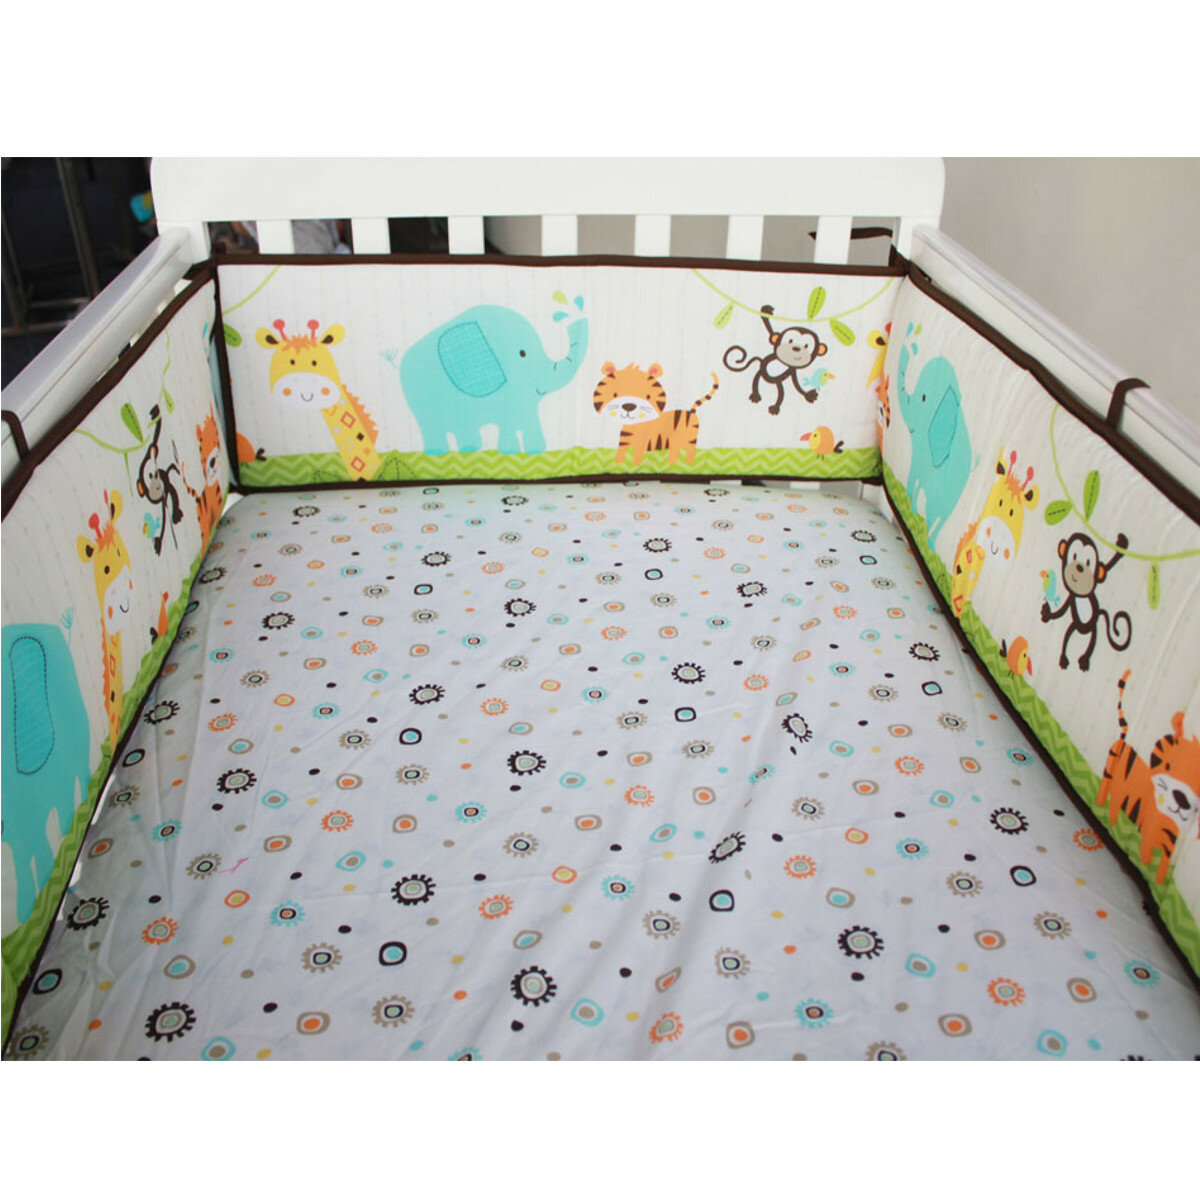 4Pcs Baby Infant Cot Crib Safety Bumper Toddler Nursery Bedding Bed Protector